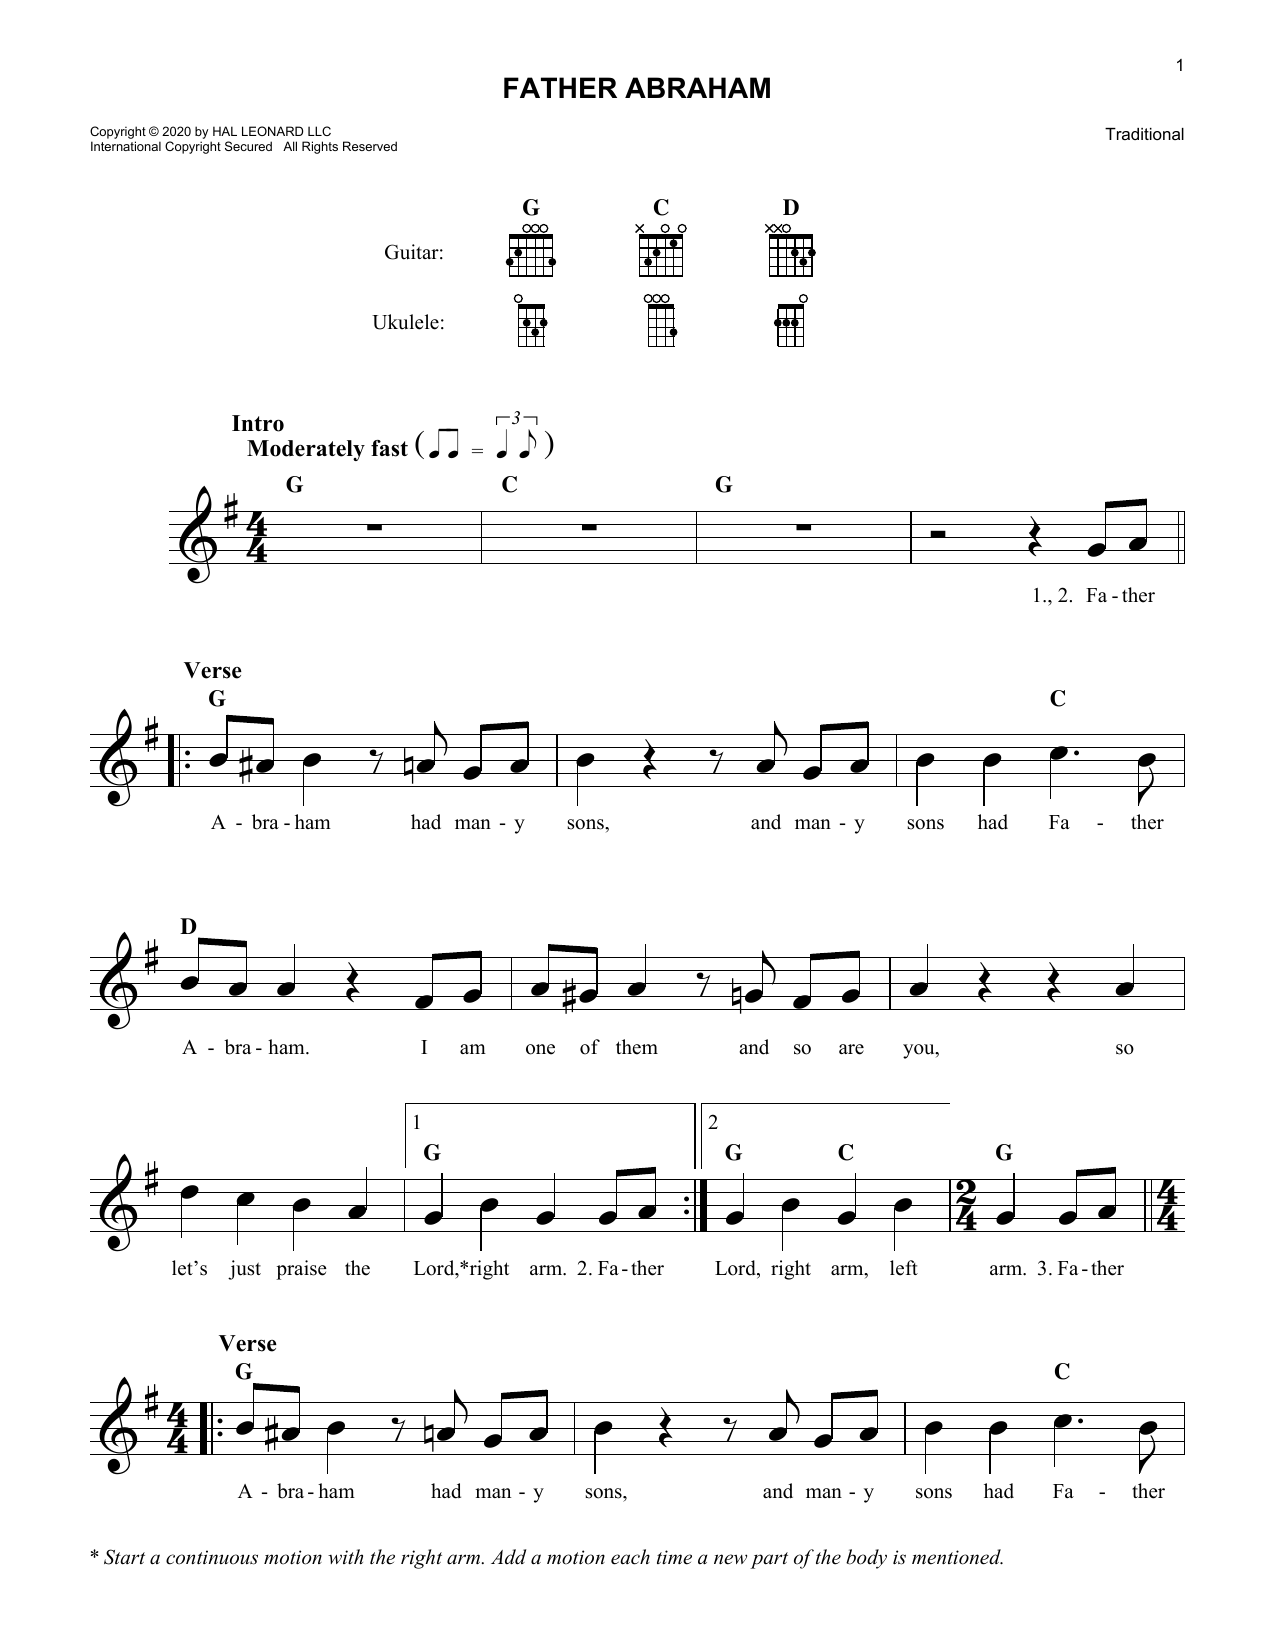 Download Traditional Father Abraham Sheet Music